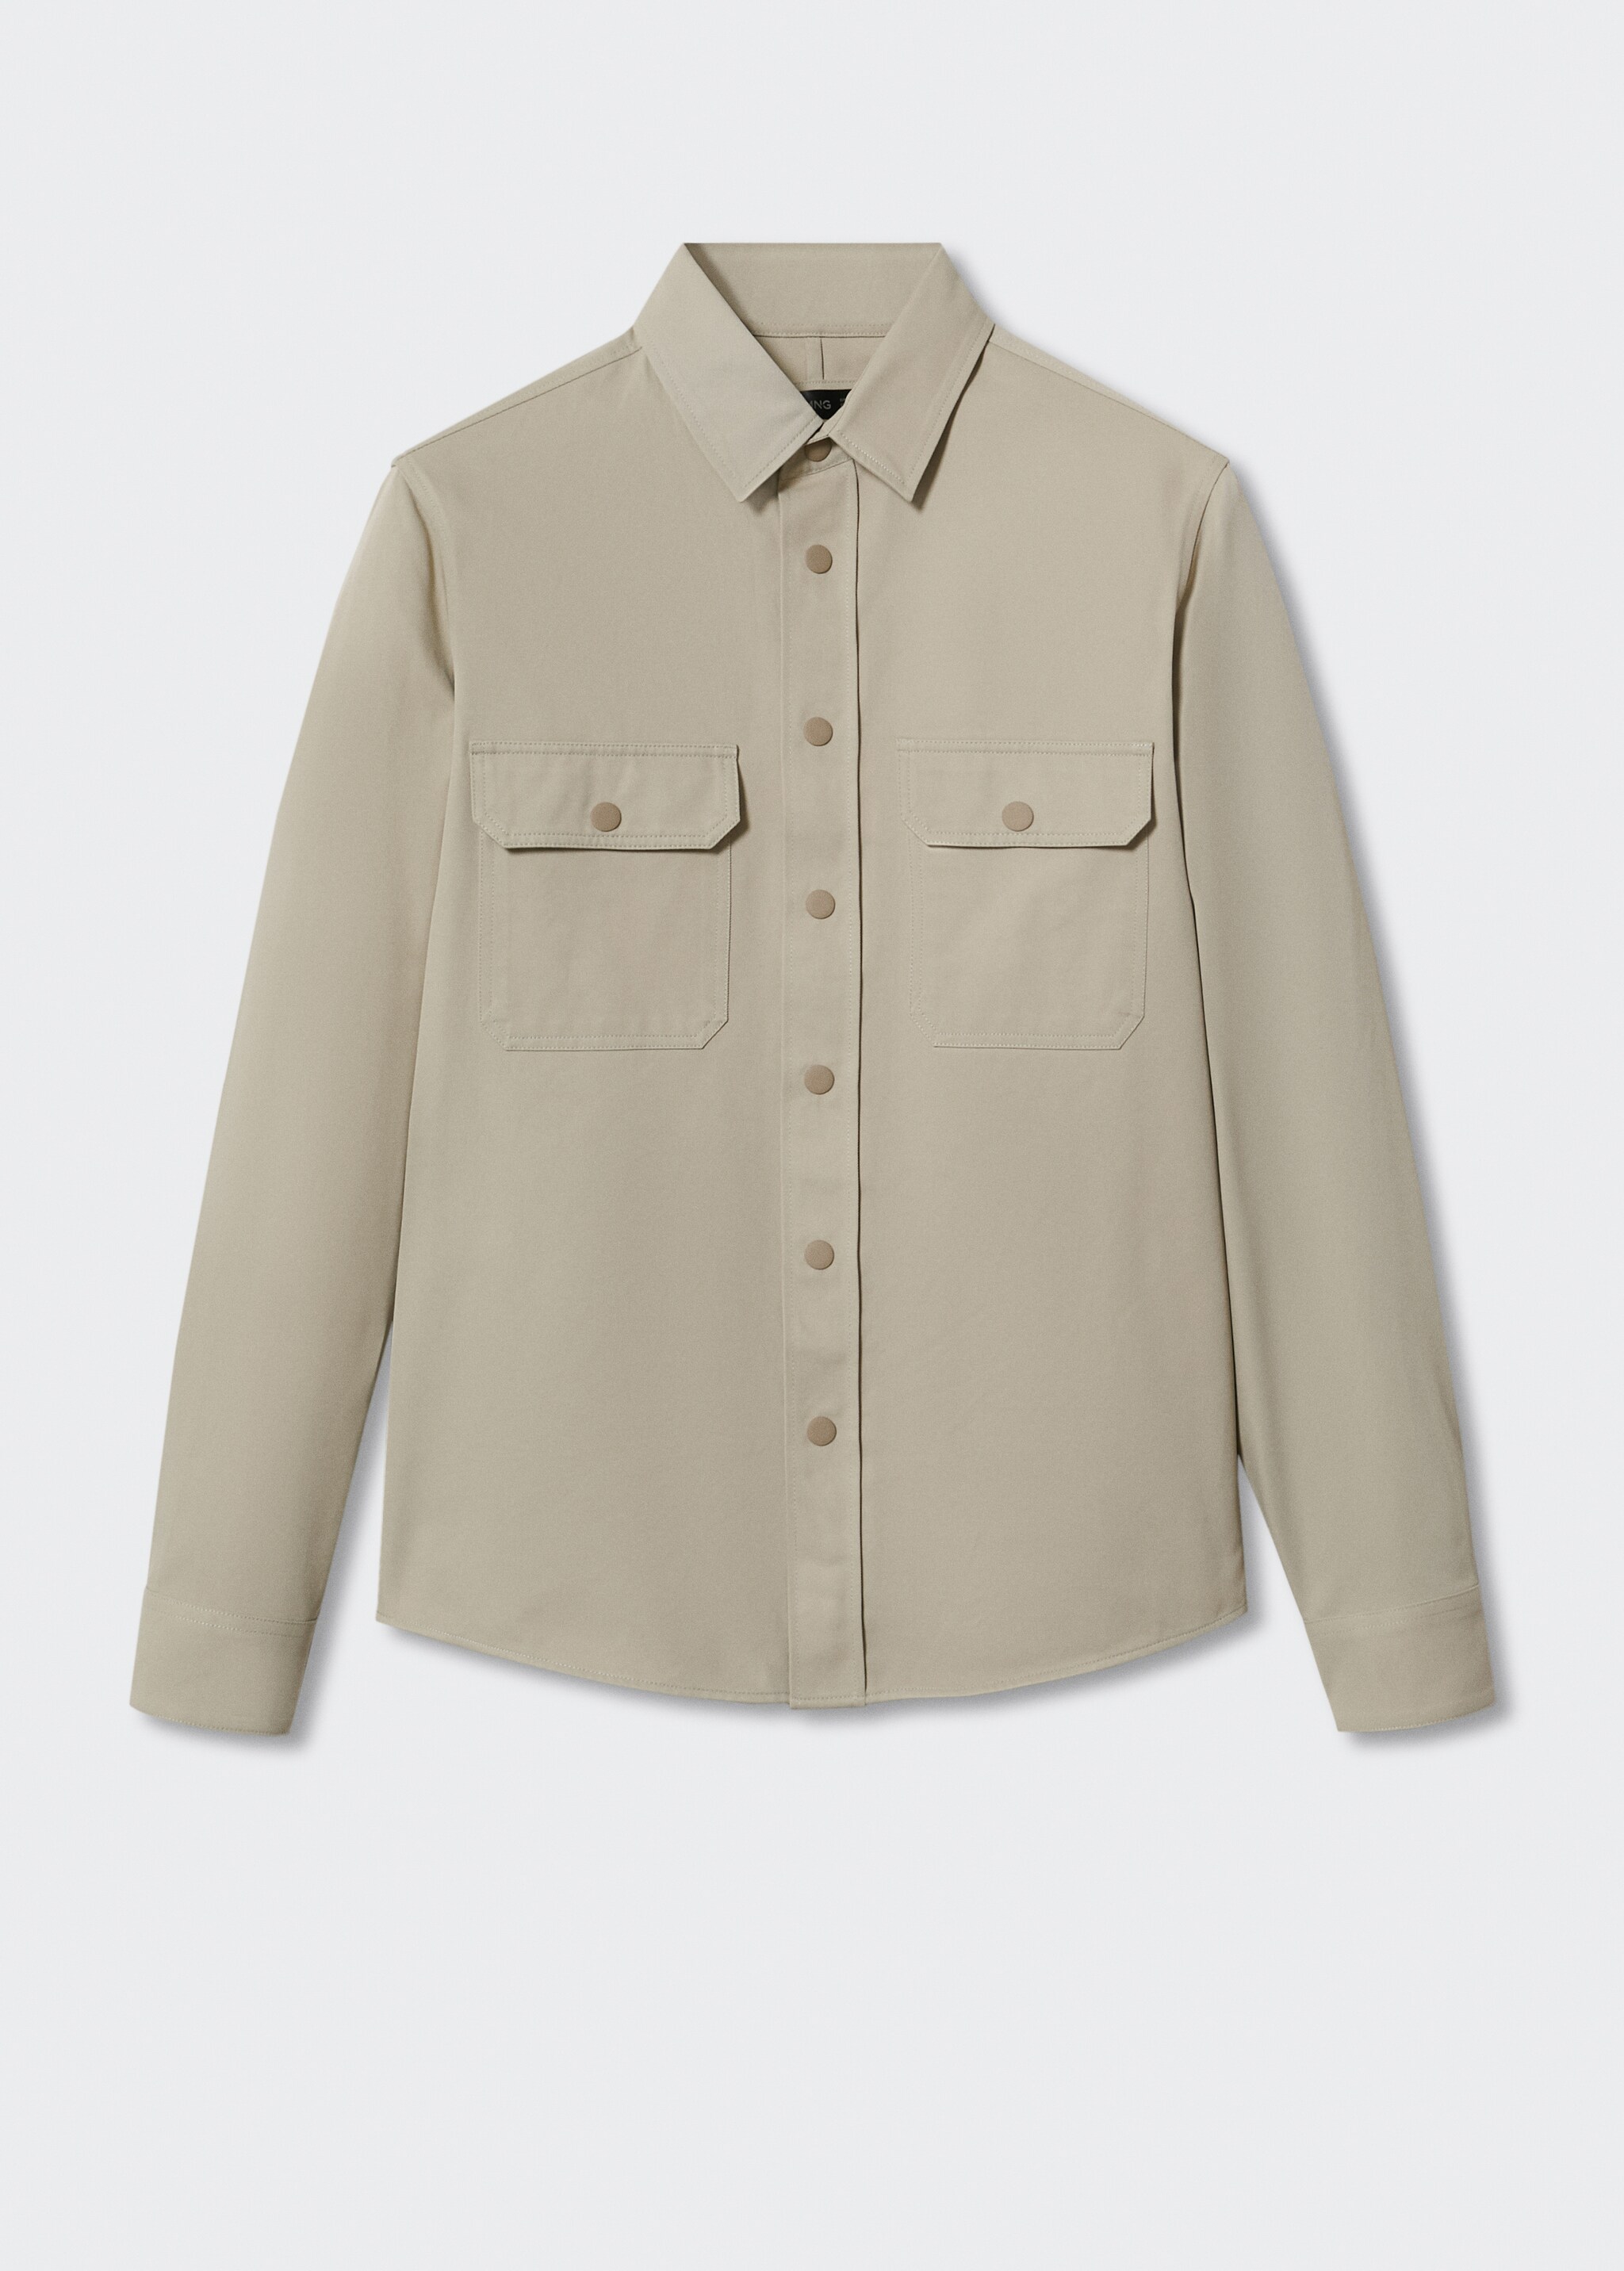 Twill cotton shirt - Article without model